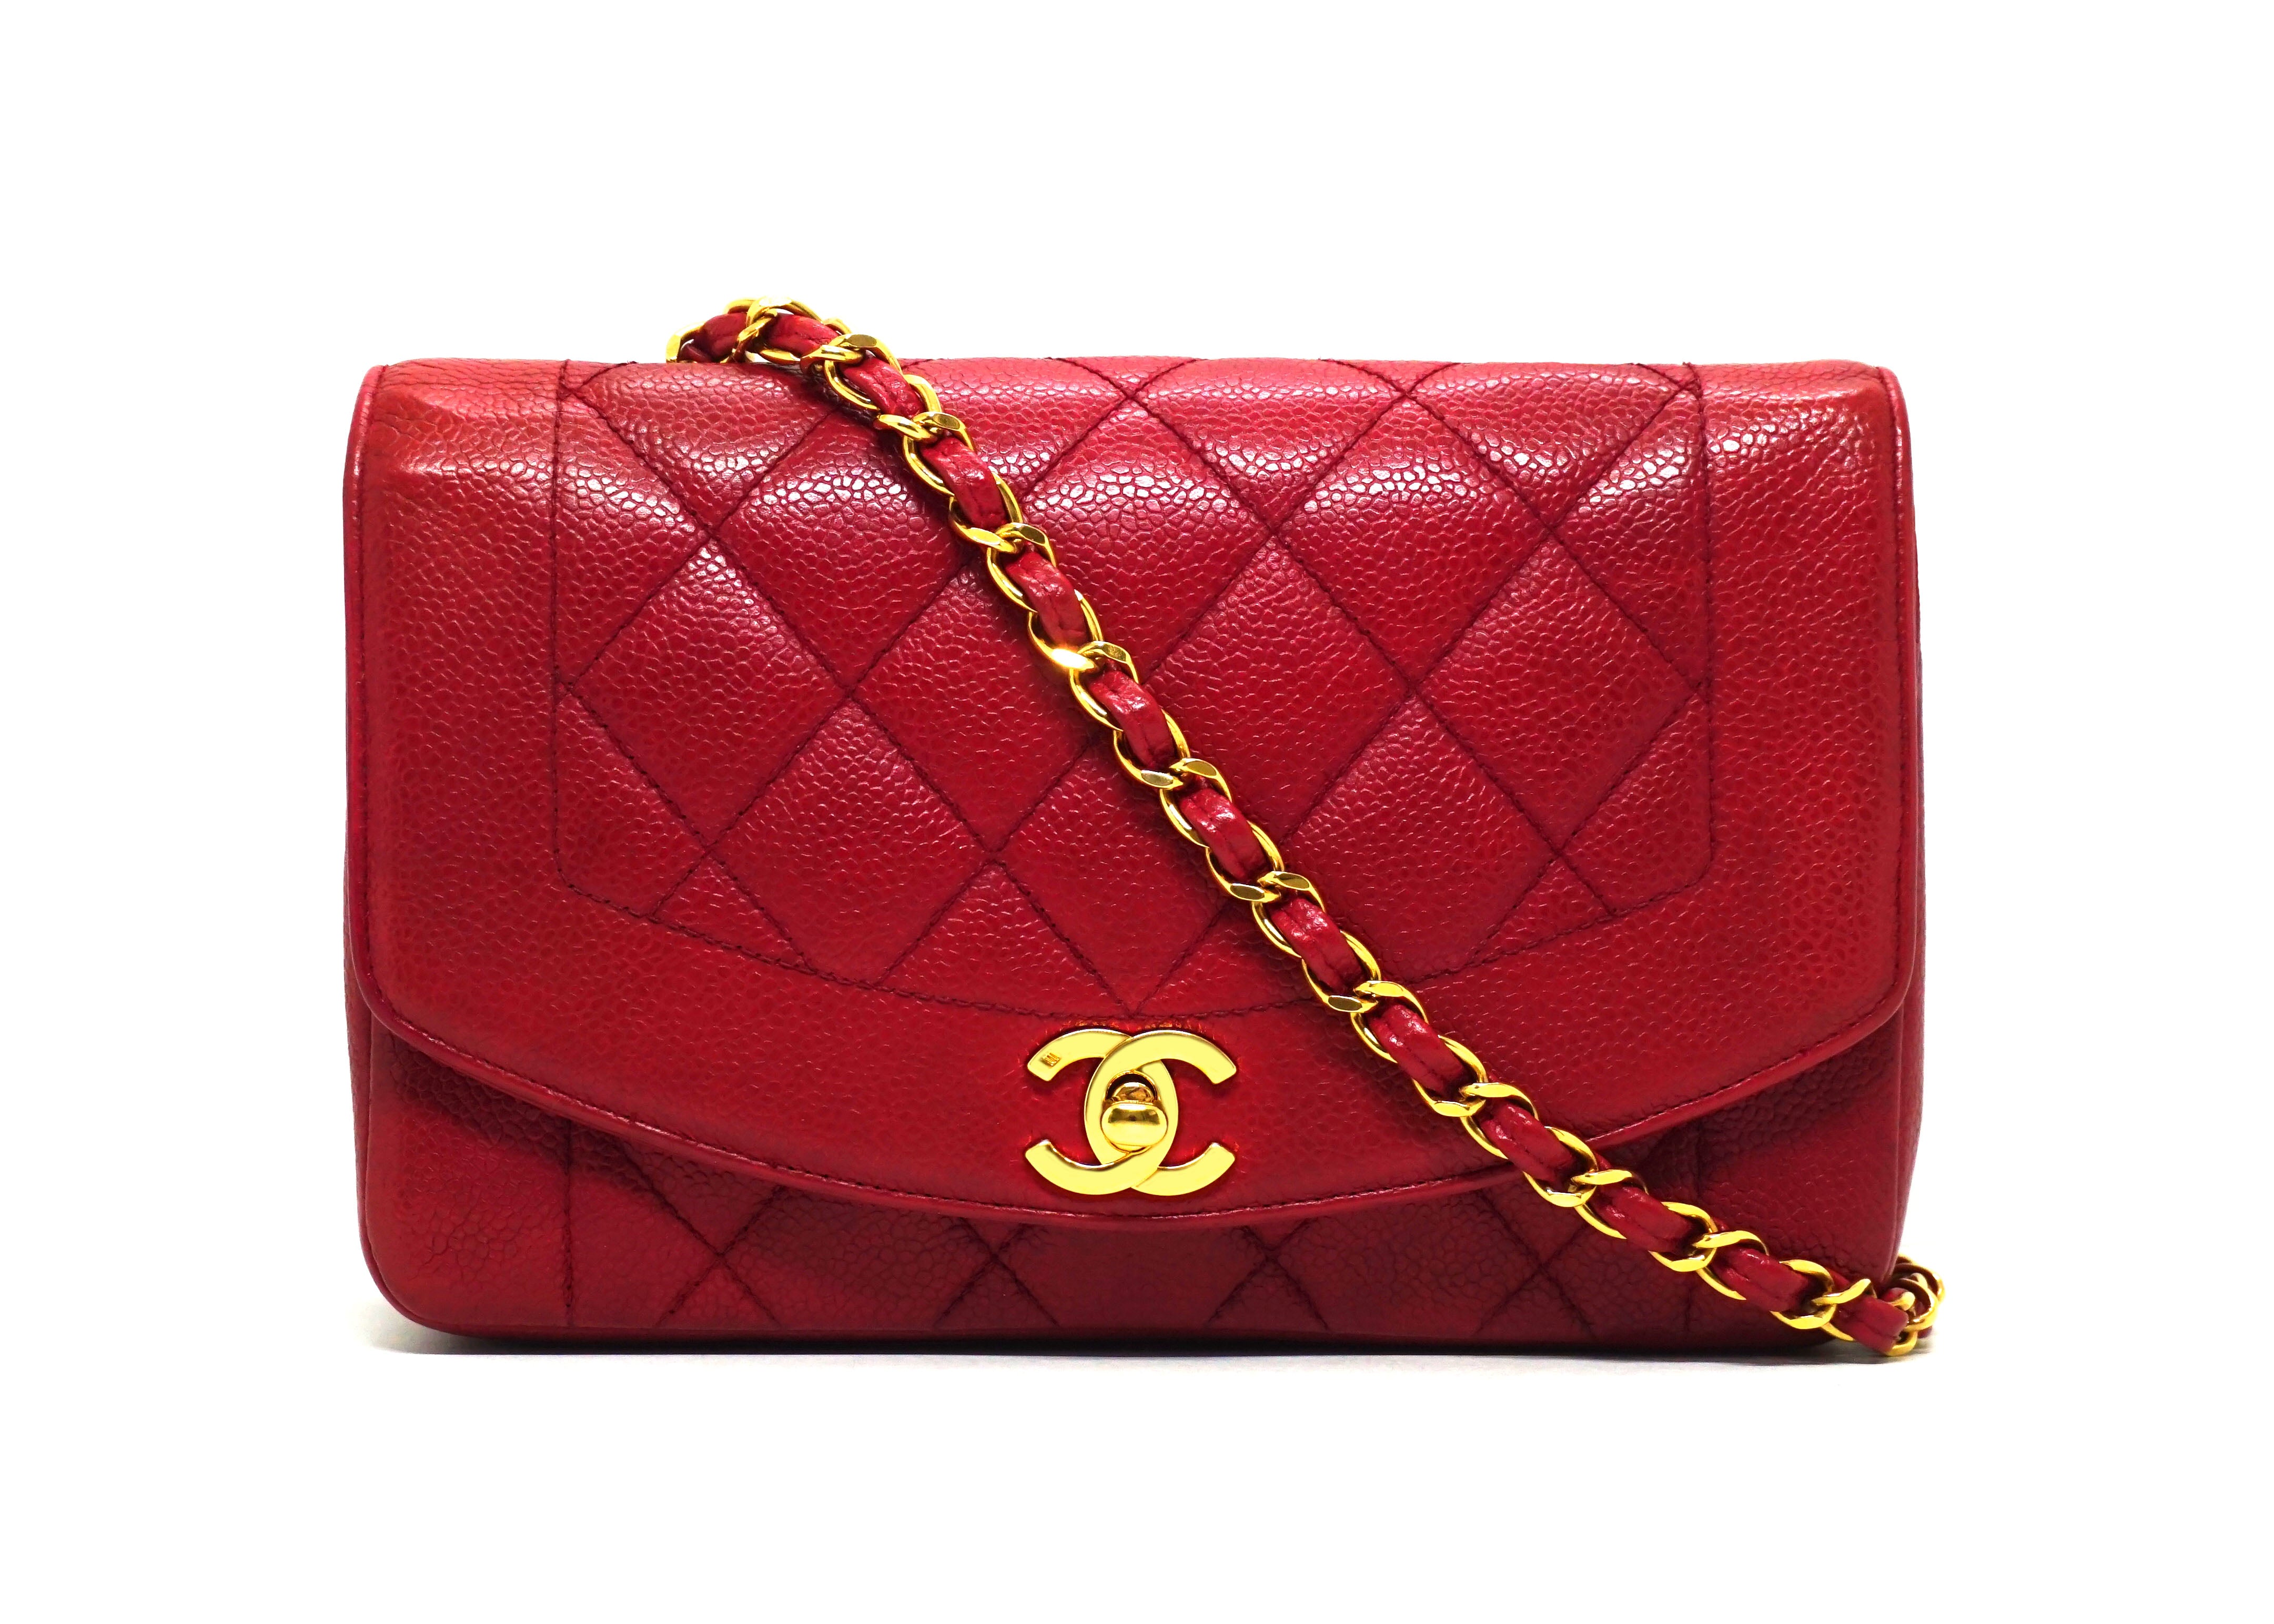 Top 10 Rare Chanel Bags - The Absolute Best Chanel Has to Offer